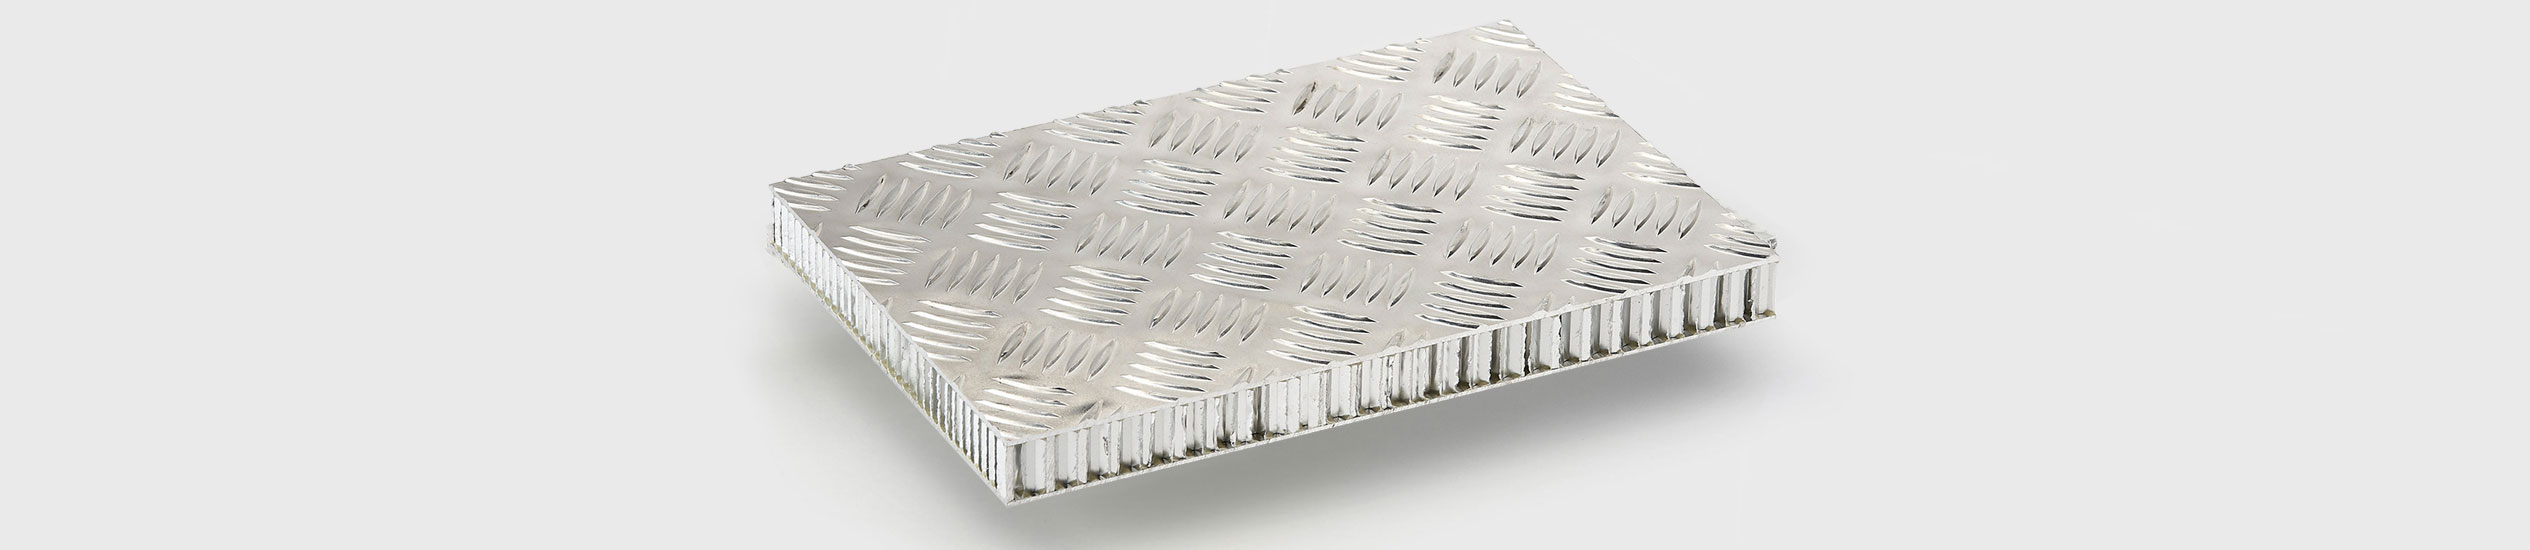 COMPOCEL® FLOOR ALU-RIS, ALU-MAN is a sandwich panel bonded with aluminium material and with a core in aluminium honeycomb